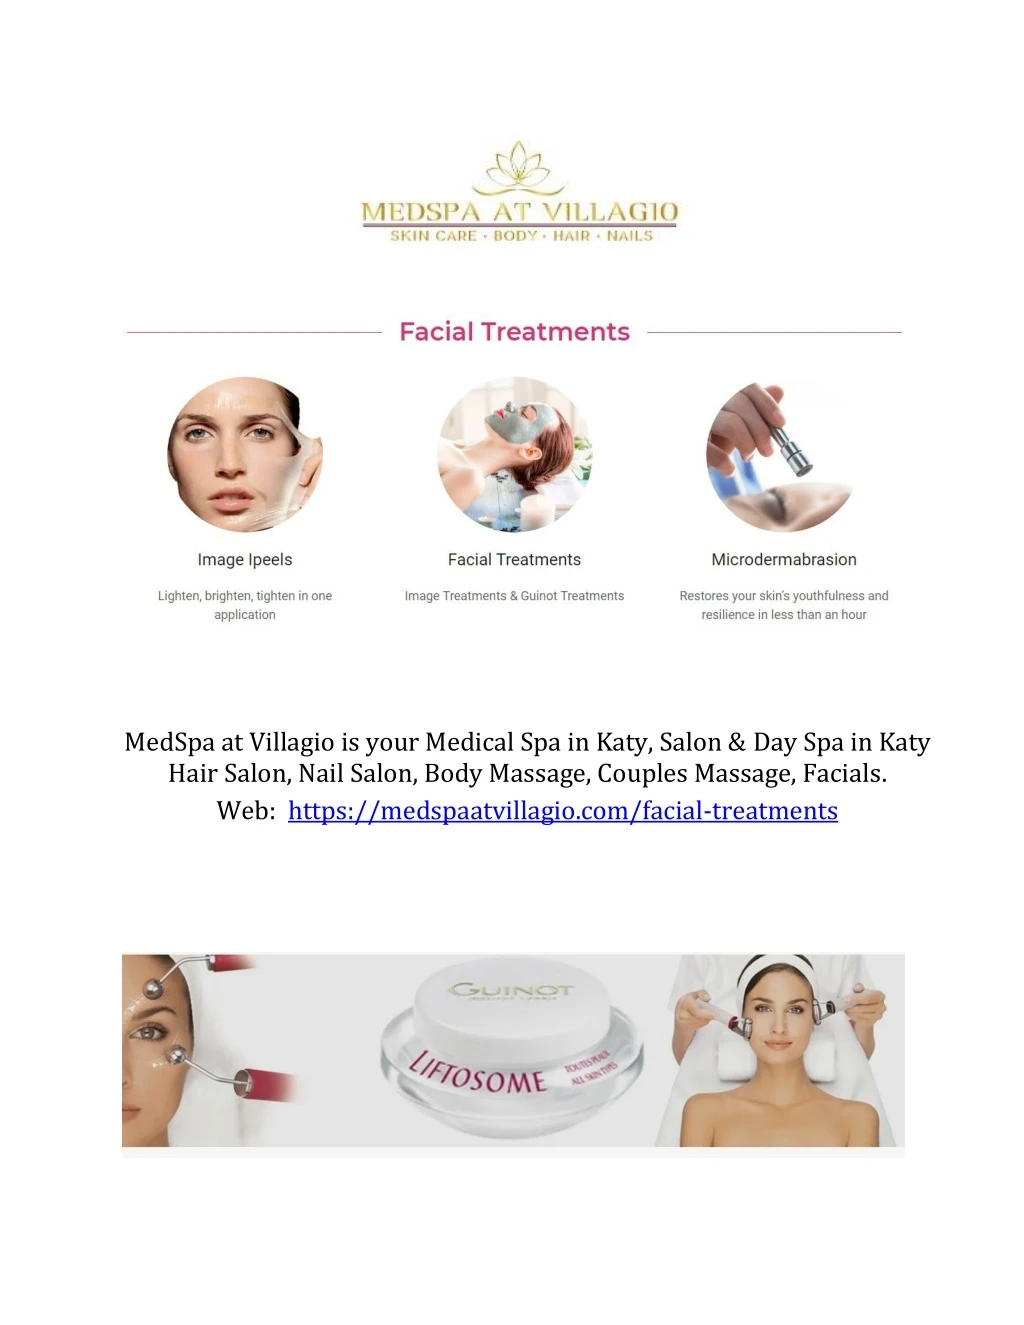 medspa at villagio is your medical spa in katy